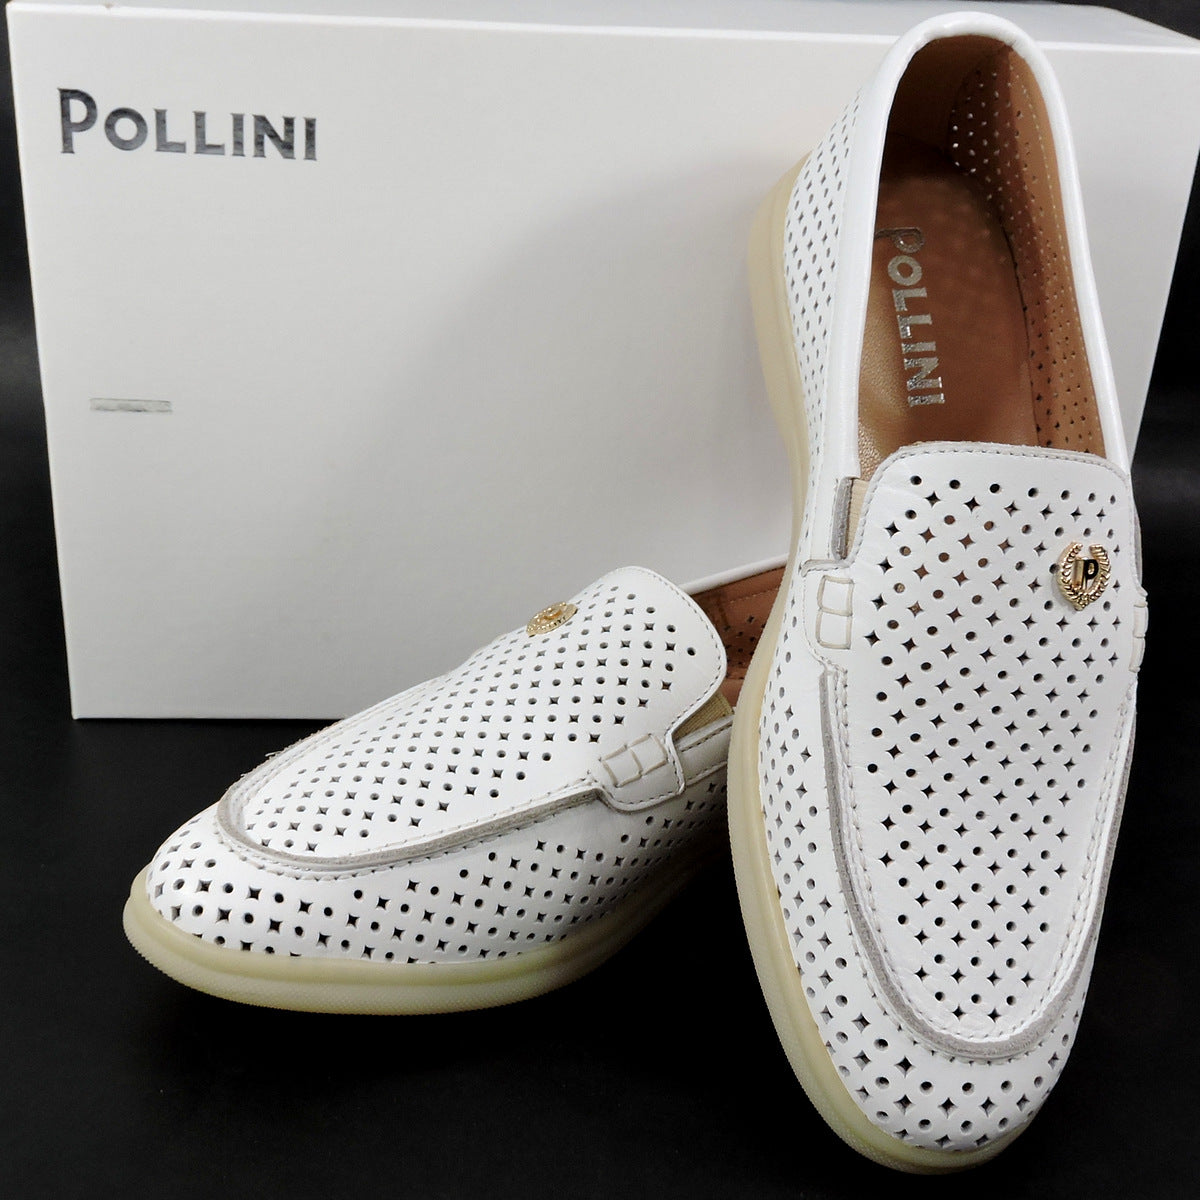 POLLINI 🇮🇹 WOMEN'S WHITE LEATHER COMFORT SUMMER LOAFERS